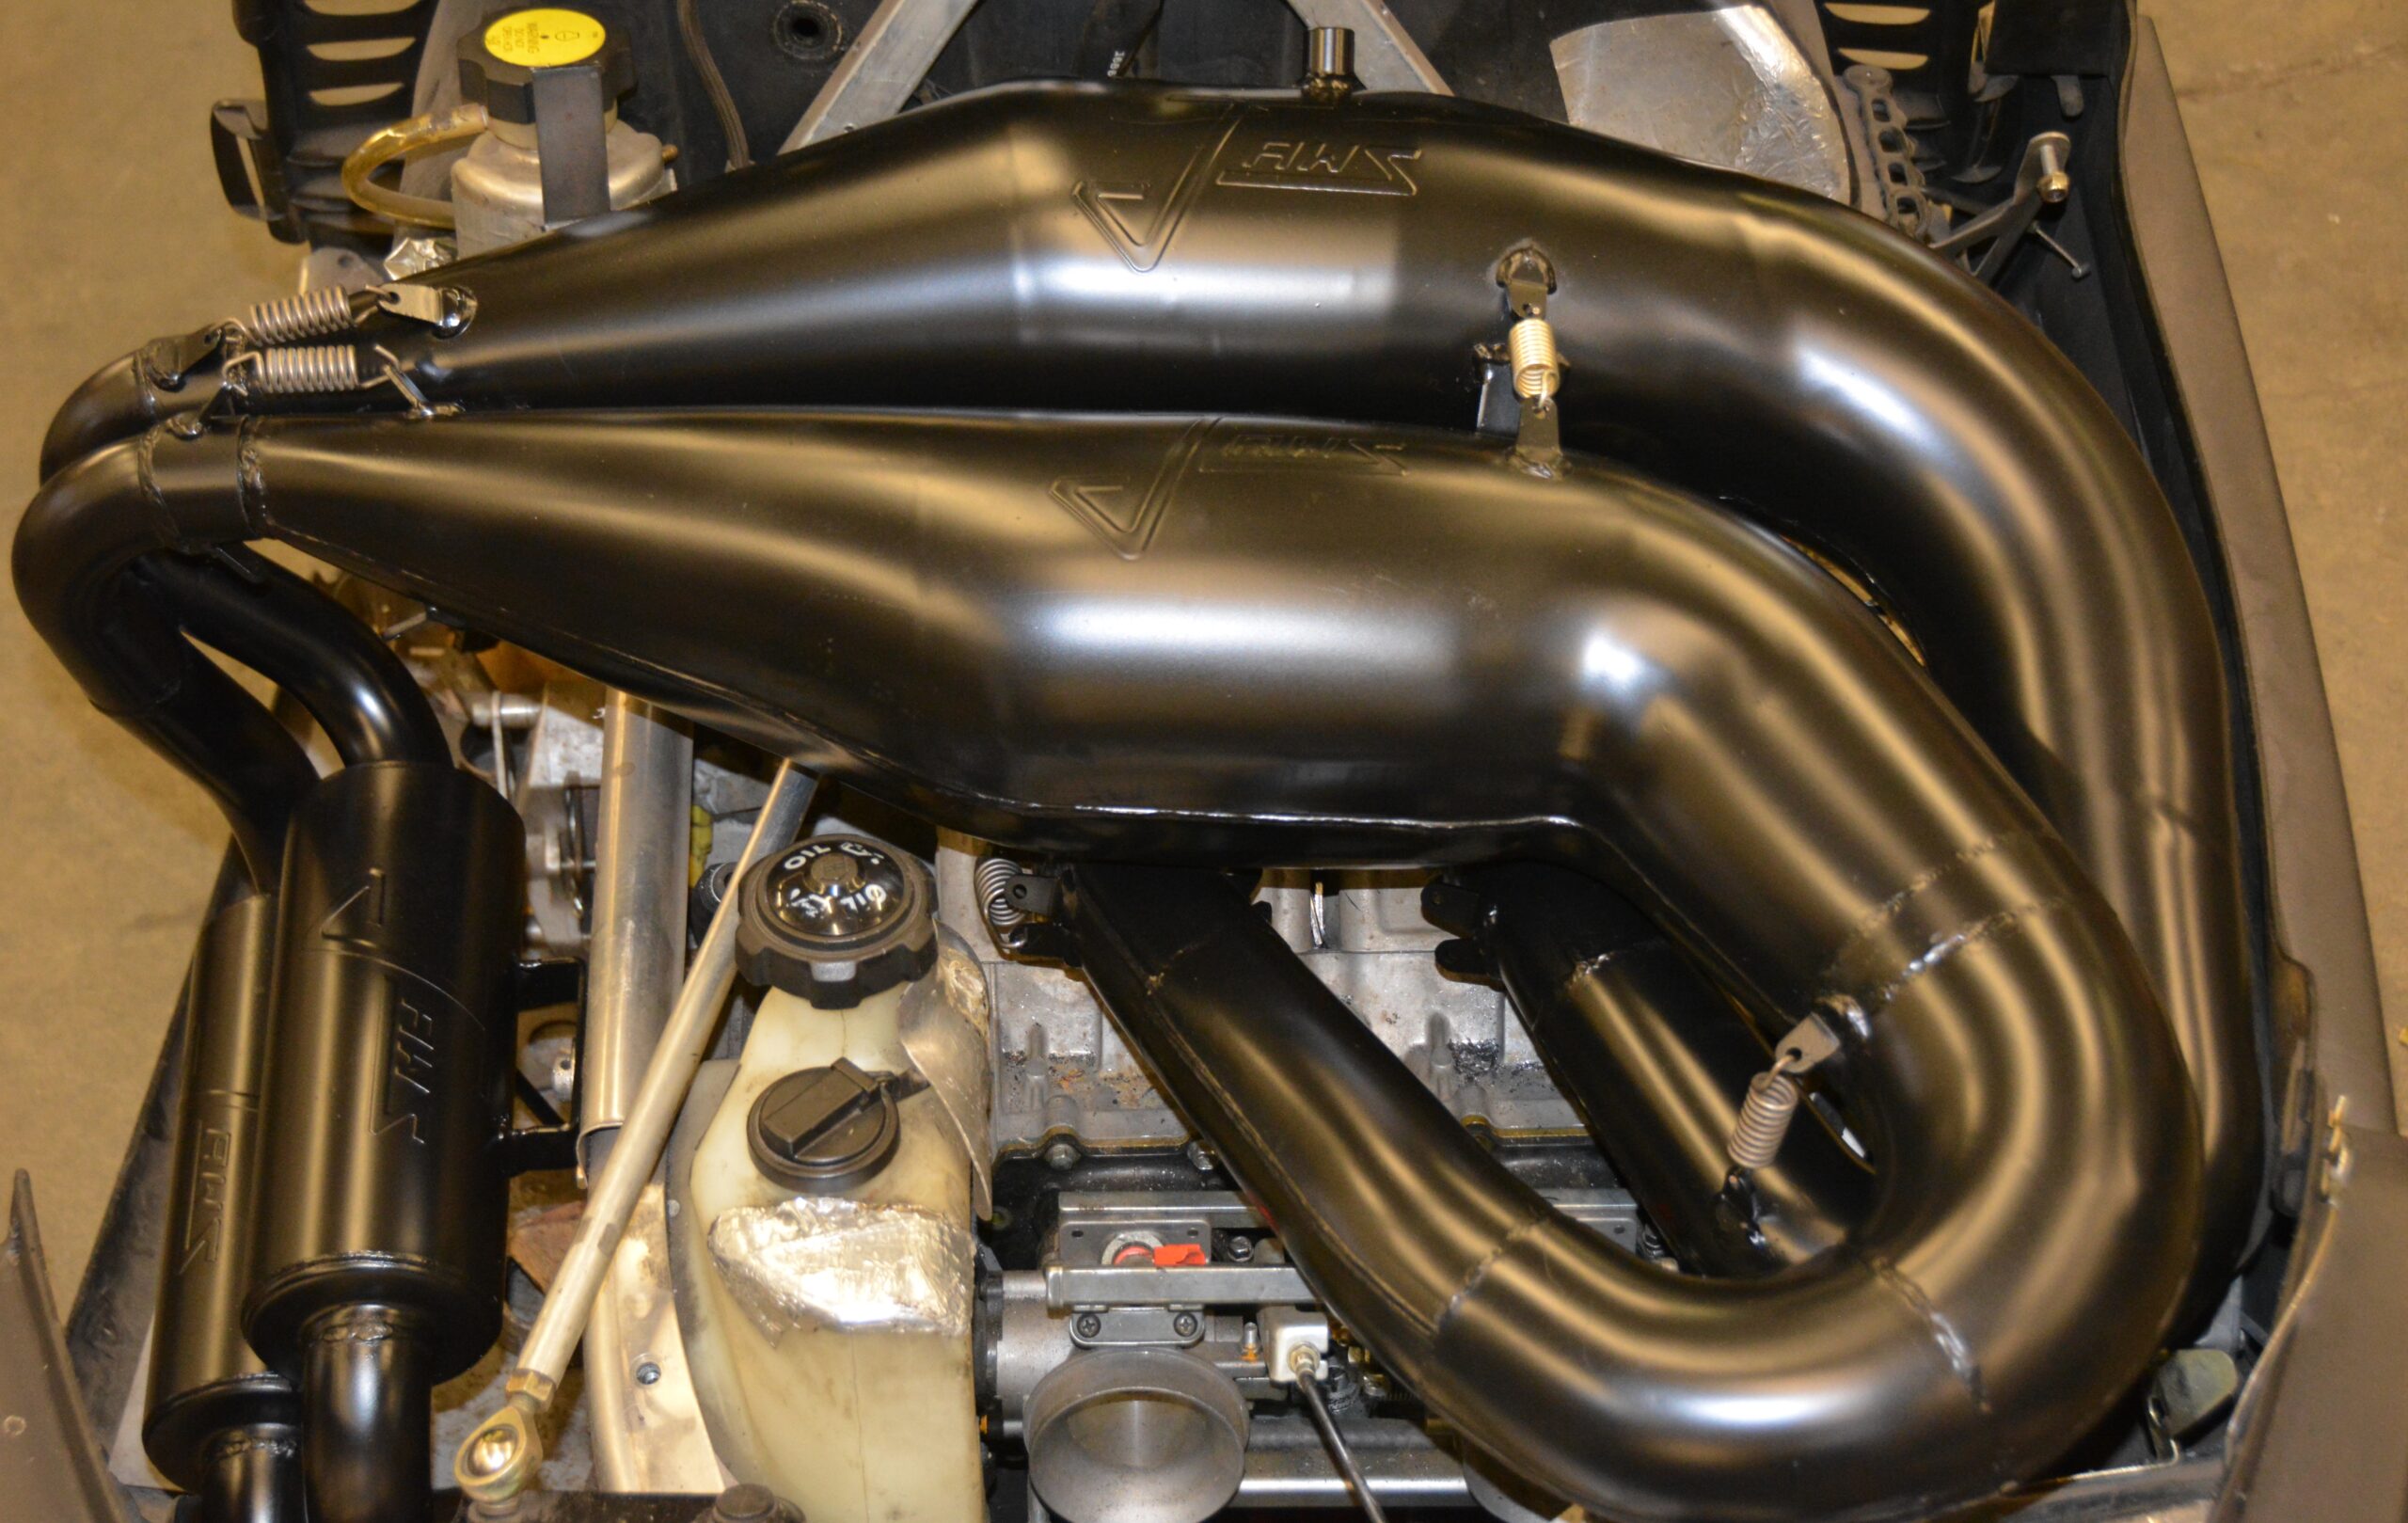 07-'11 M1000 / CROSSFIRE 1000 TWIN PIPES - JAWS Performance